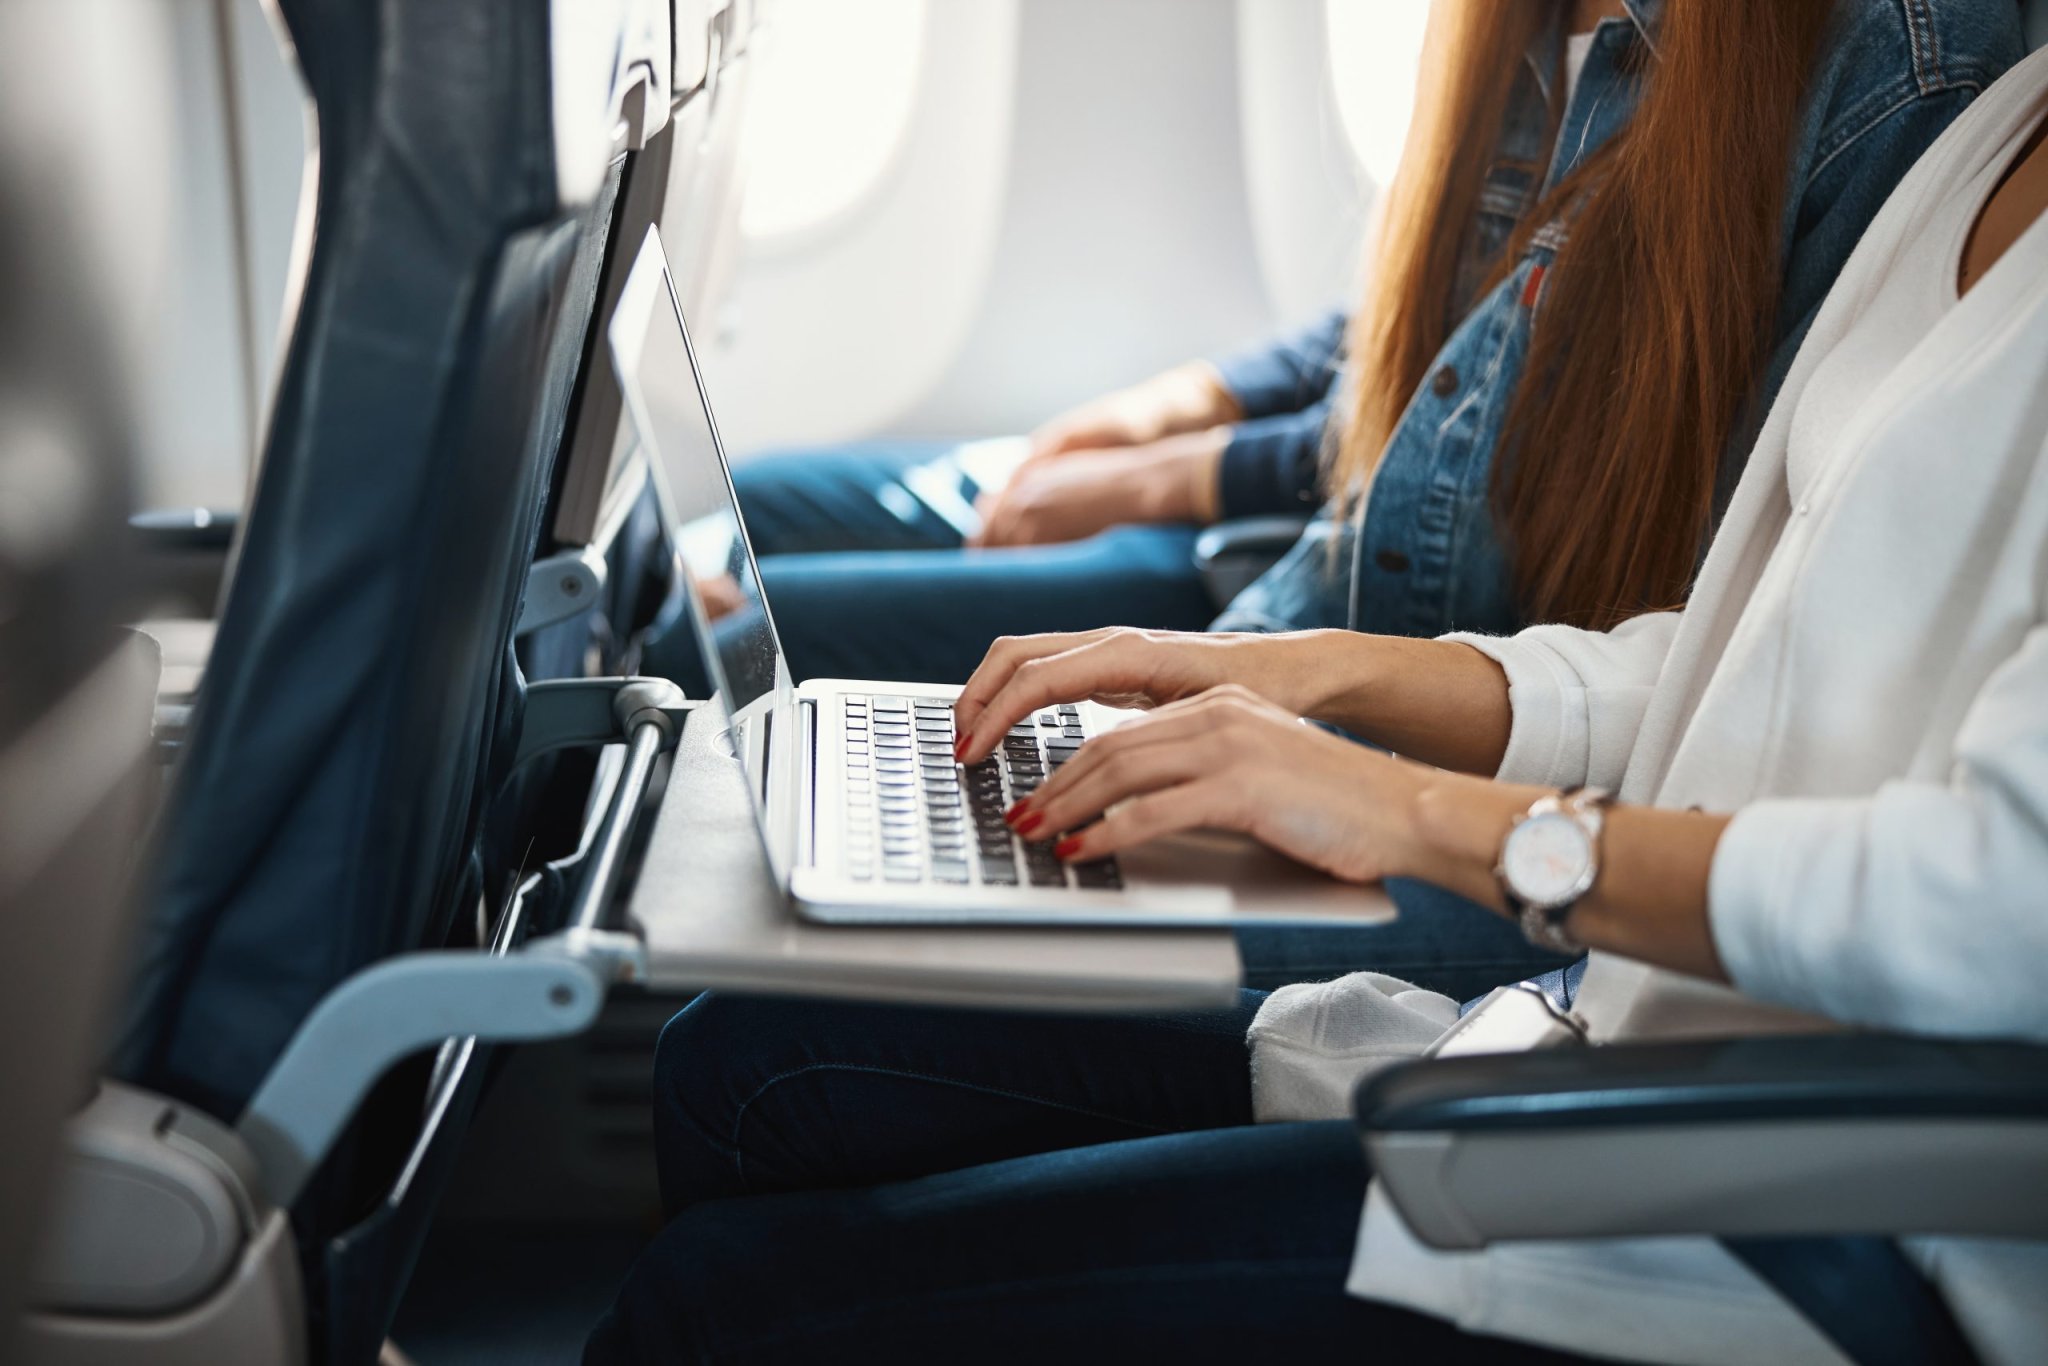 How Does In-Flight Wi-Fi Work, Anyway?